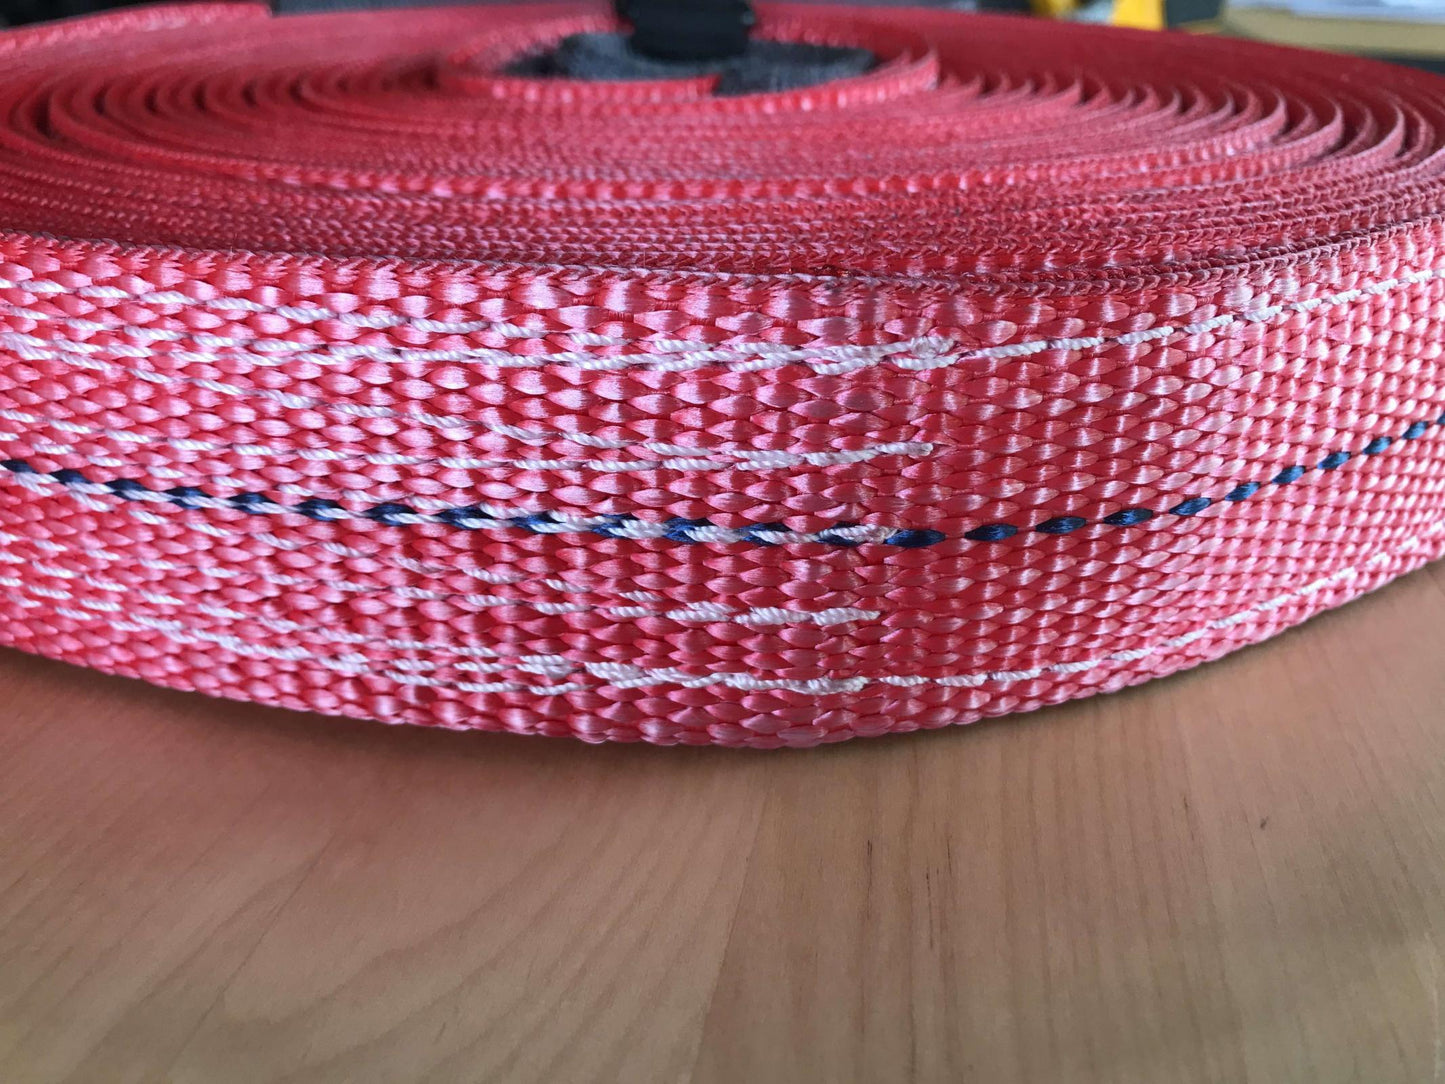 Factor 55 - 00074 - Tow Strap - 30 Foot Tow Strap Standard Duty 30 Foot x 2 Inch Red